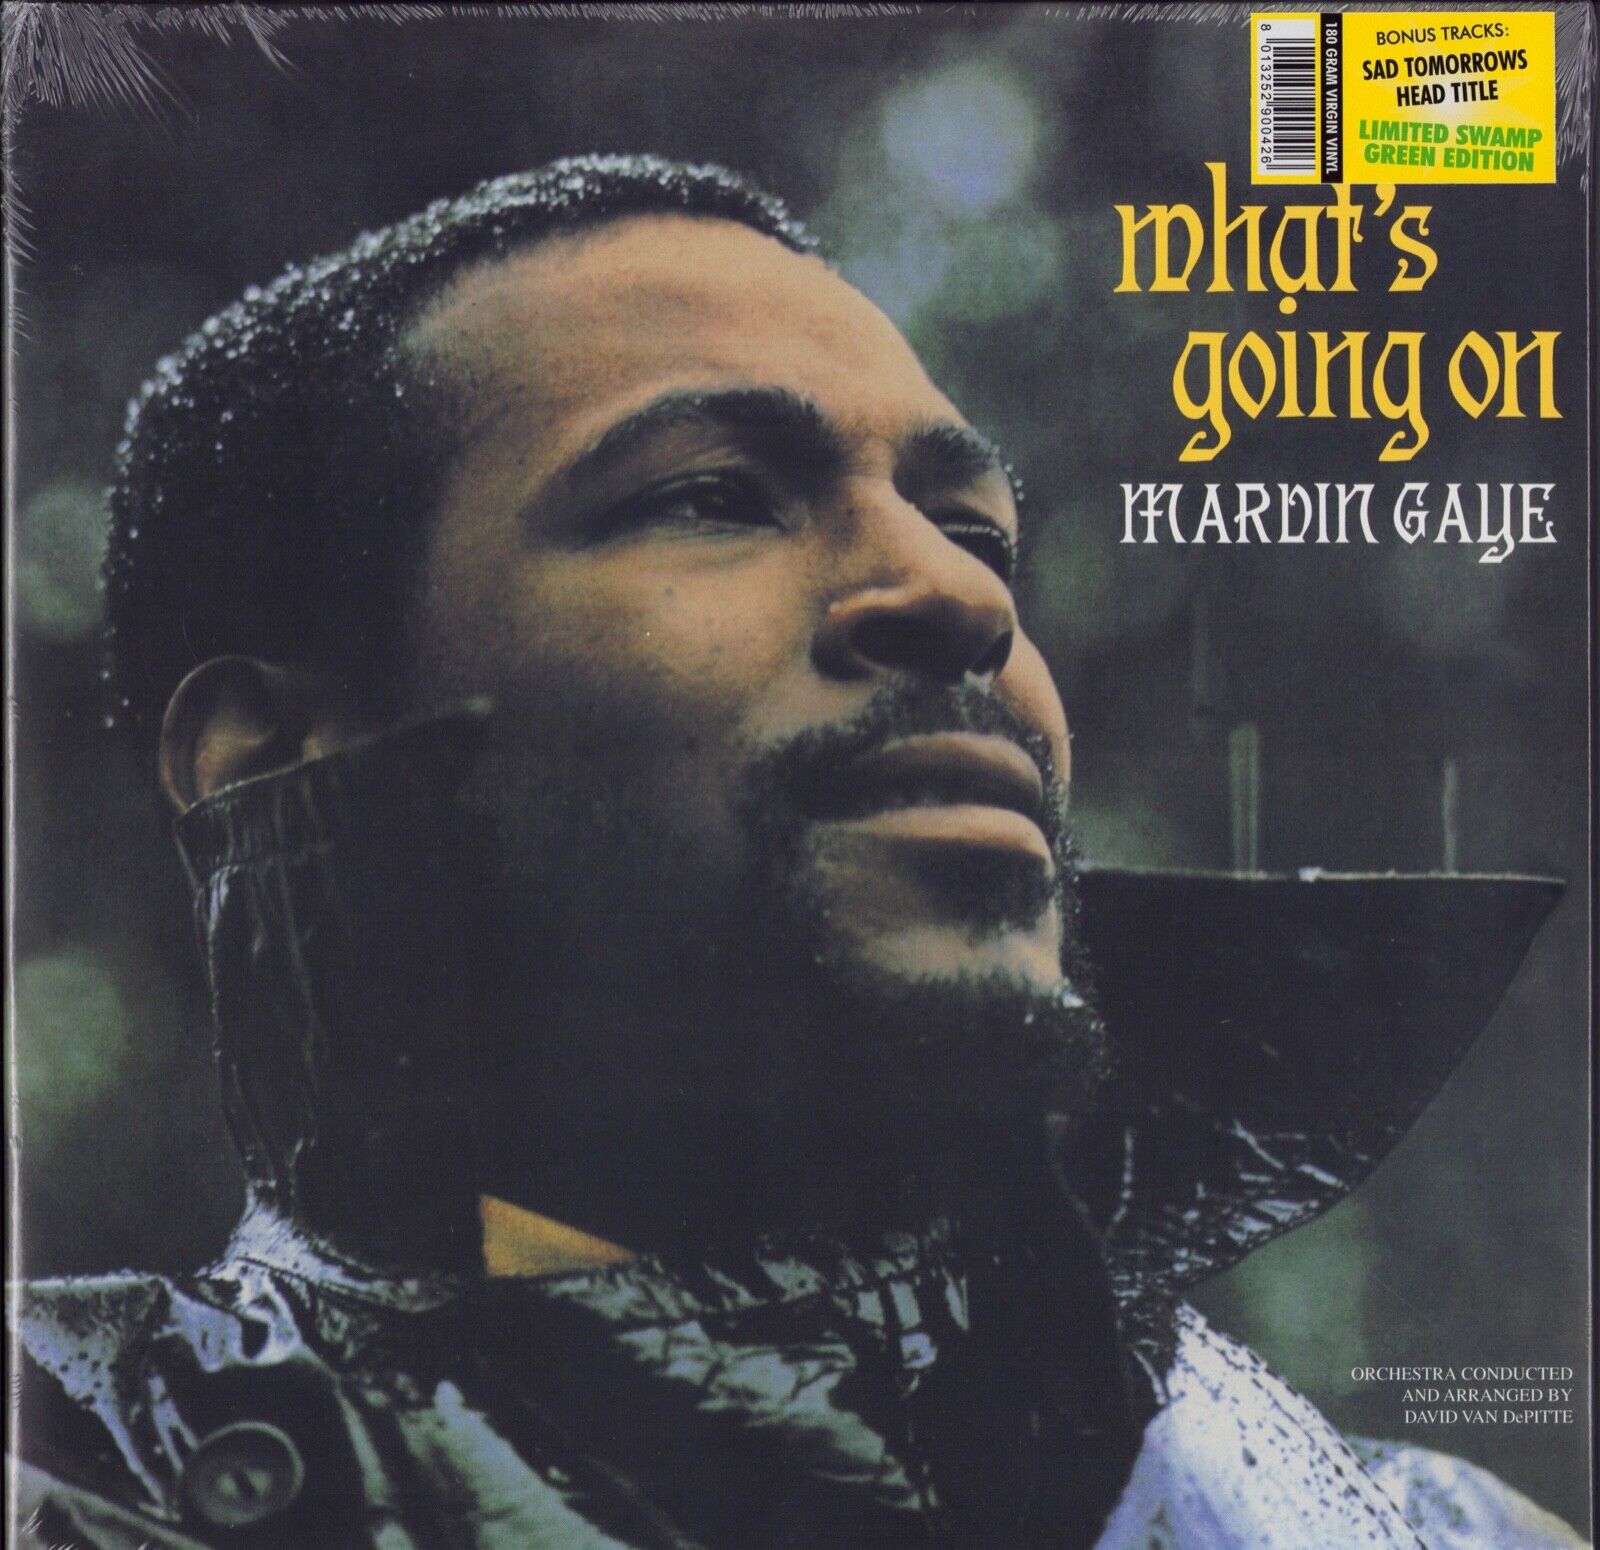 Marvin Gaye ‎- What's Going On (Green Vinyl LP) Limited Edition